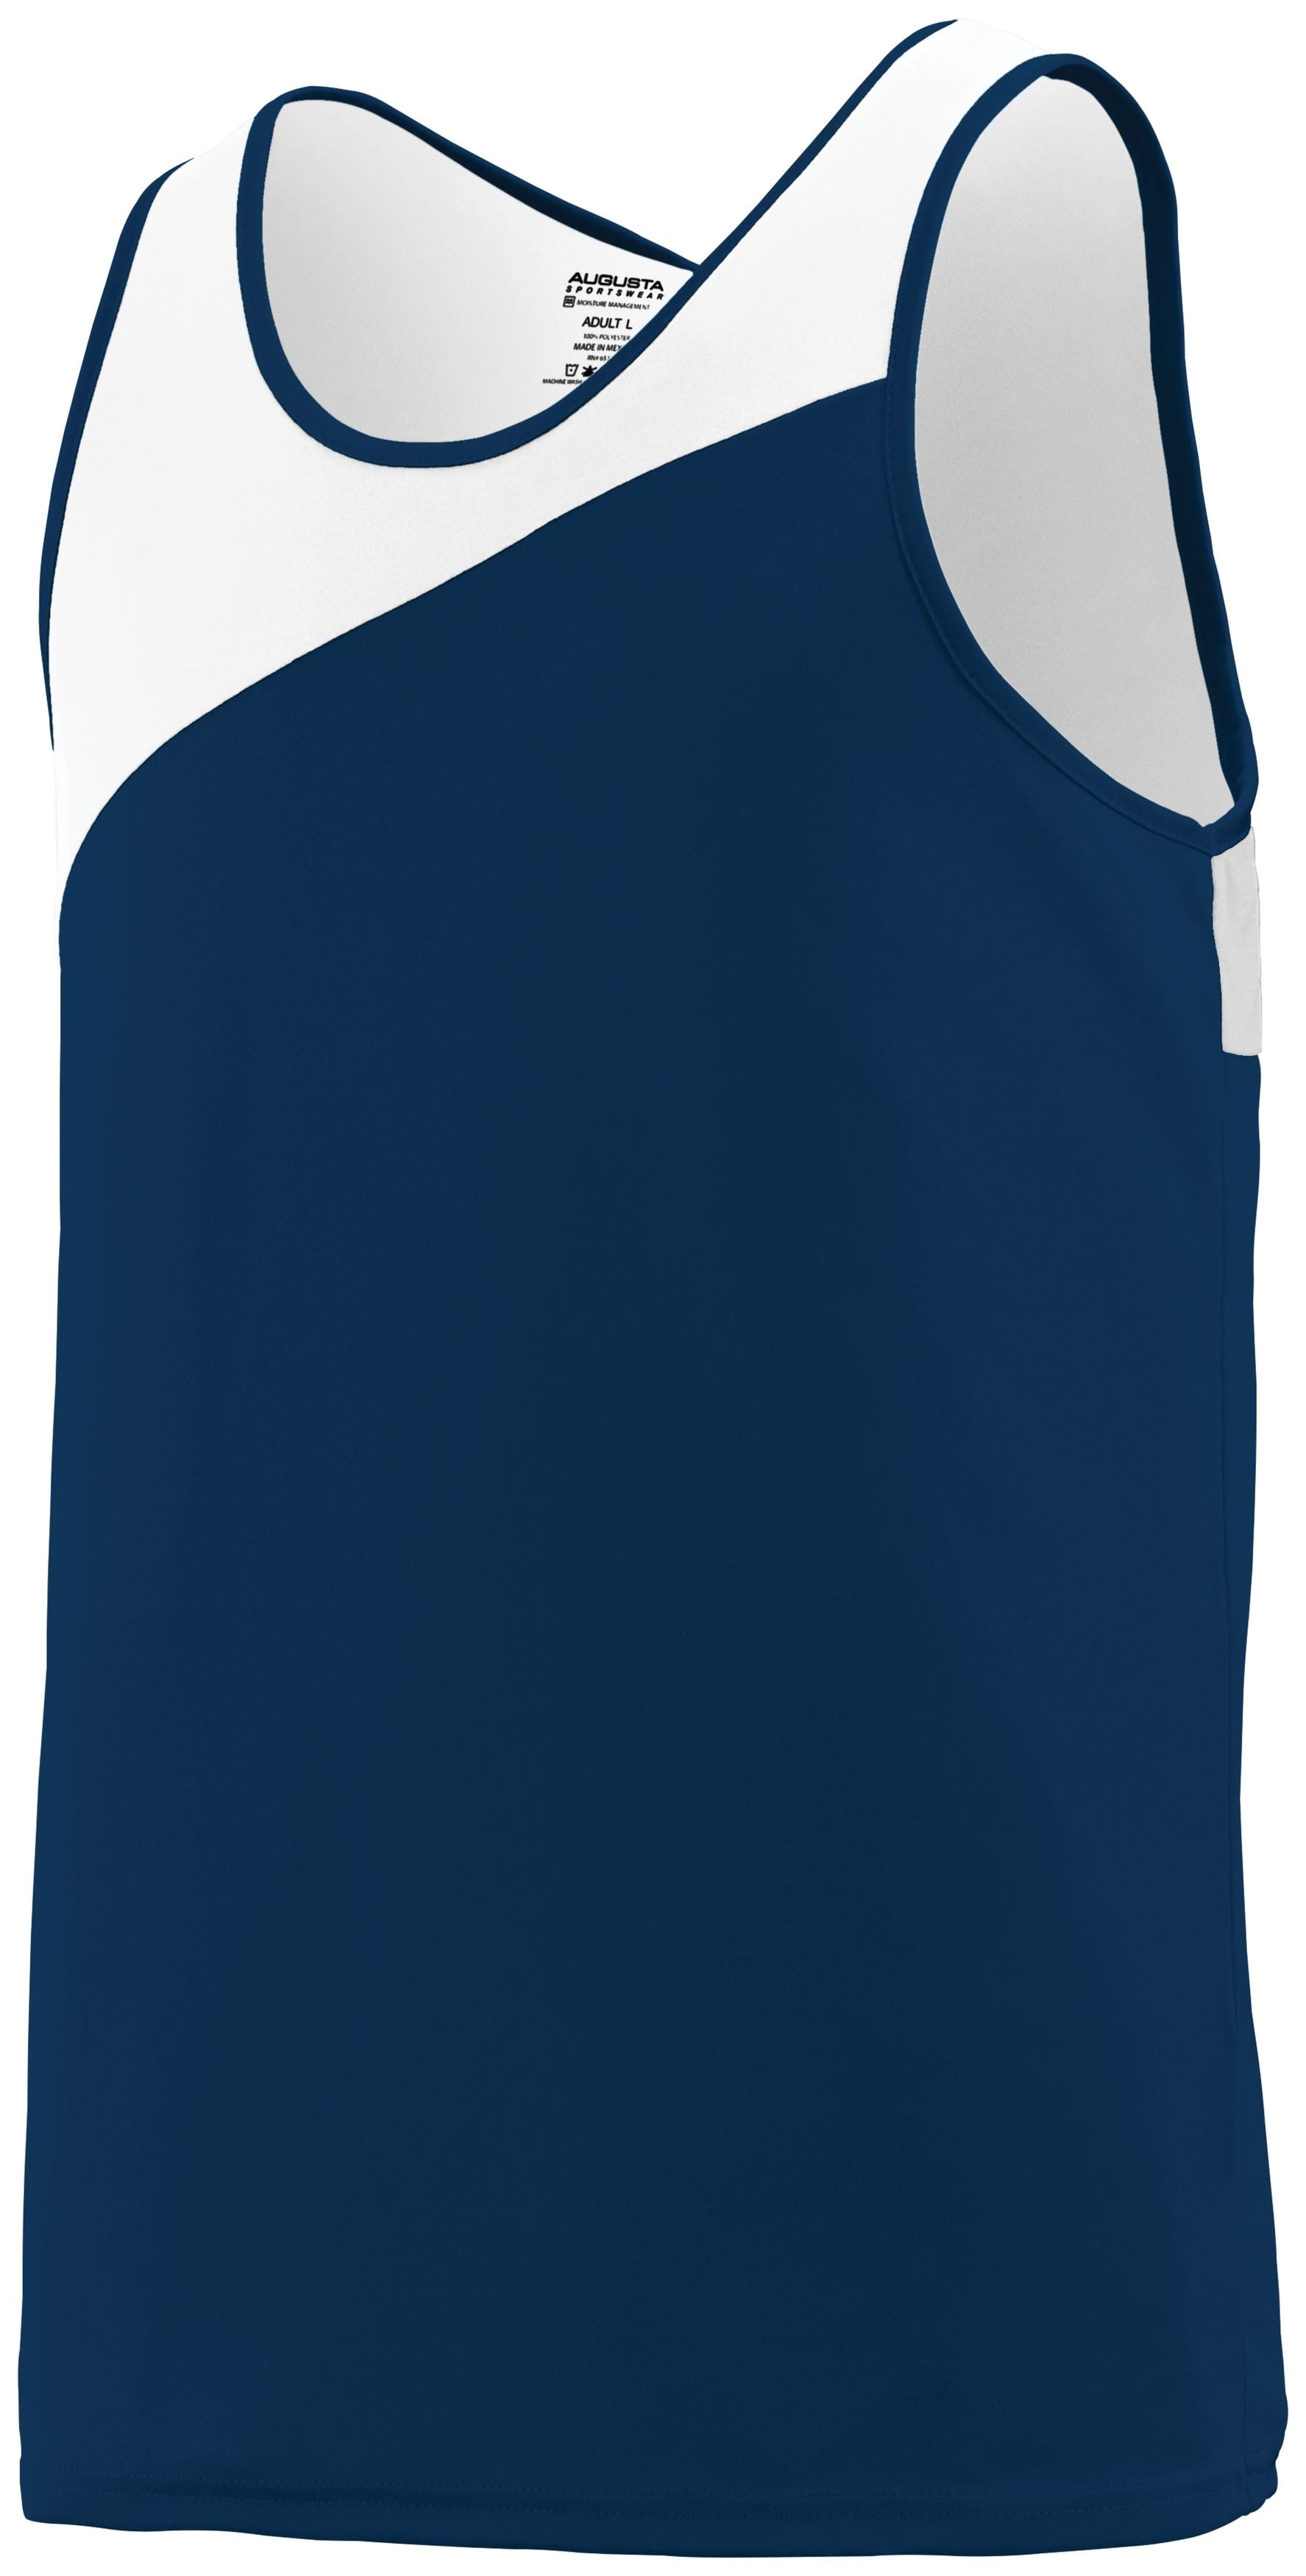 Augusta Sportswear Accelerate Jersey in Navy/White  -Part of the Adult, Adult-Jersey, Augusta-Products, Track-Field, Shirts product lines at KanaleyCreations.com